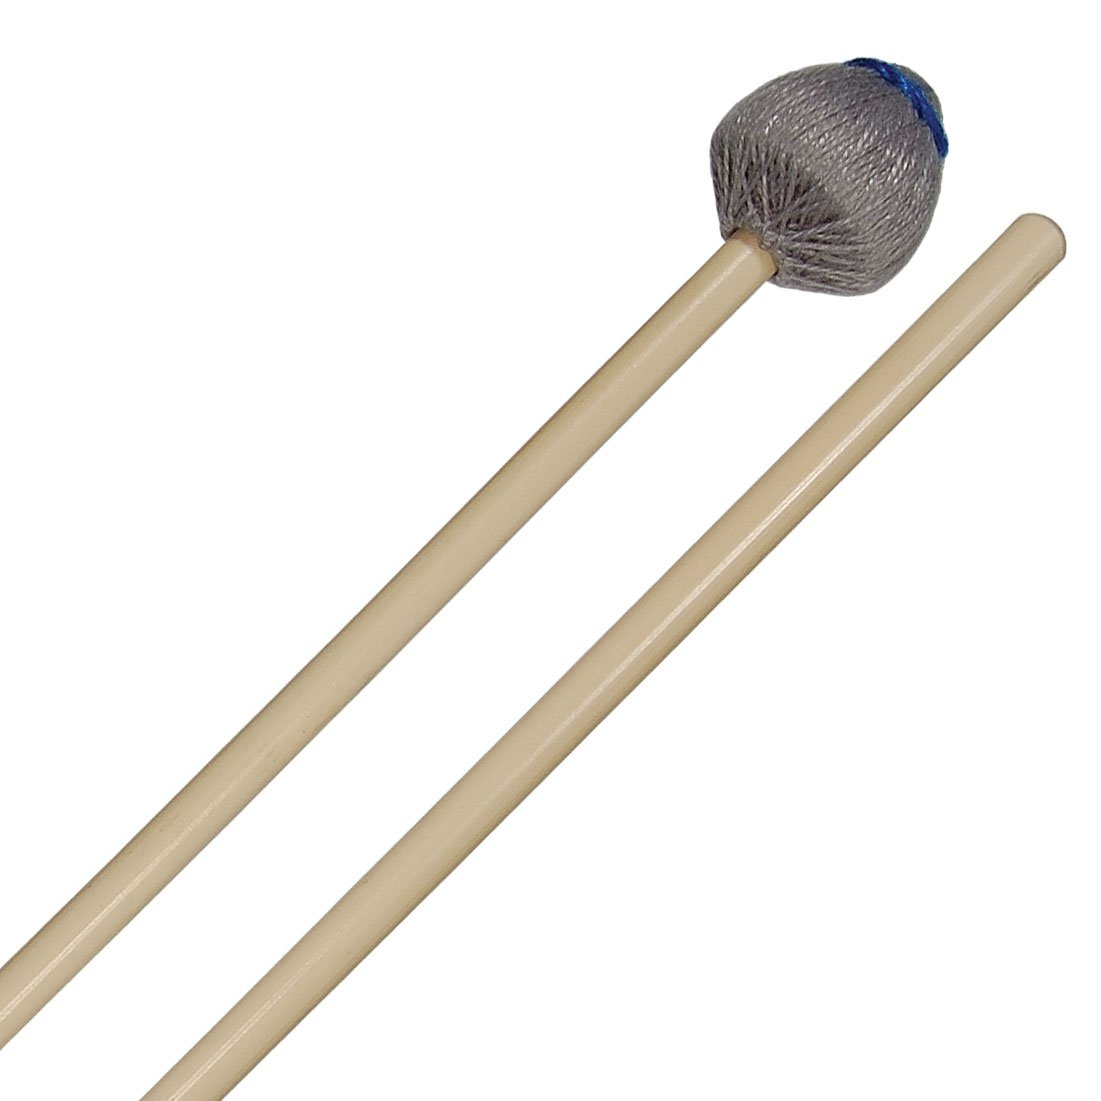 Vic Firth - Ney Rosauro Signature Series Keyboard Mallets-Percussion-Vic Firth-M226: Medium Cord-Music Elements